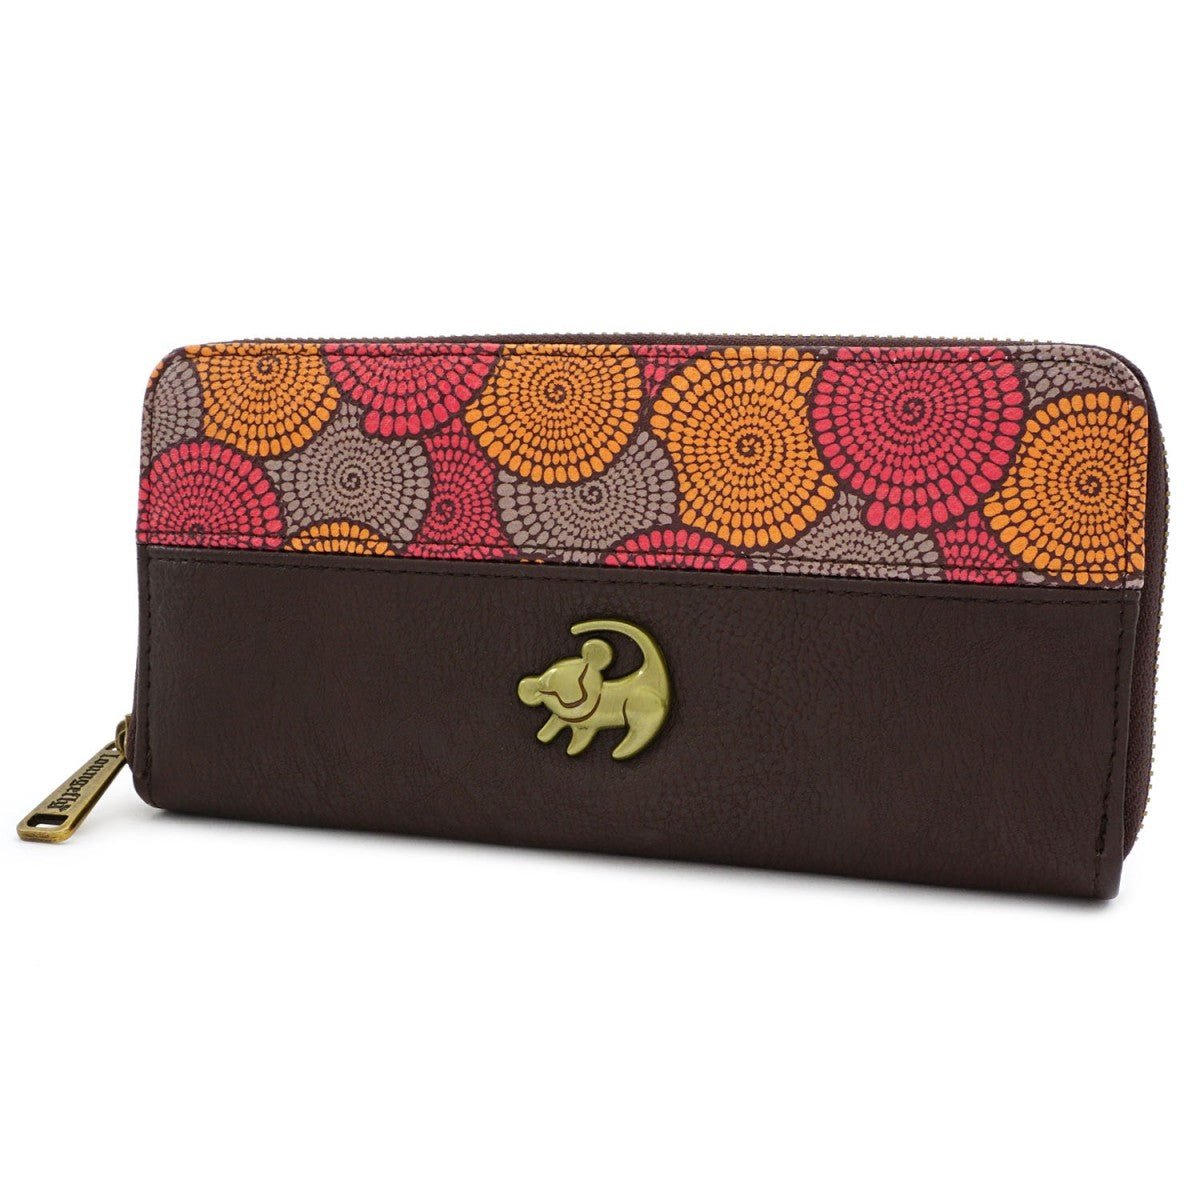 Loungefly x Lion King African Floral Print Purse - GeekCore